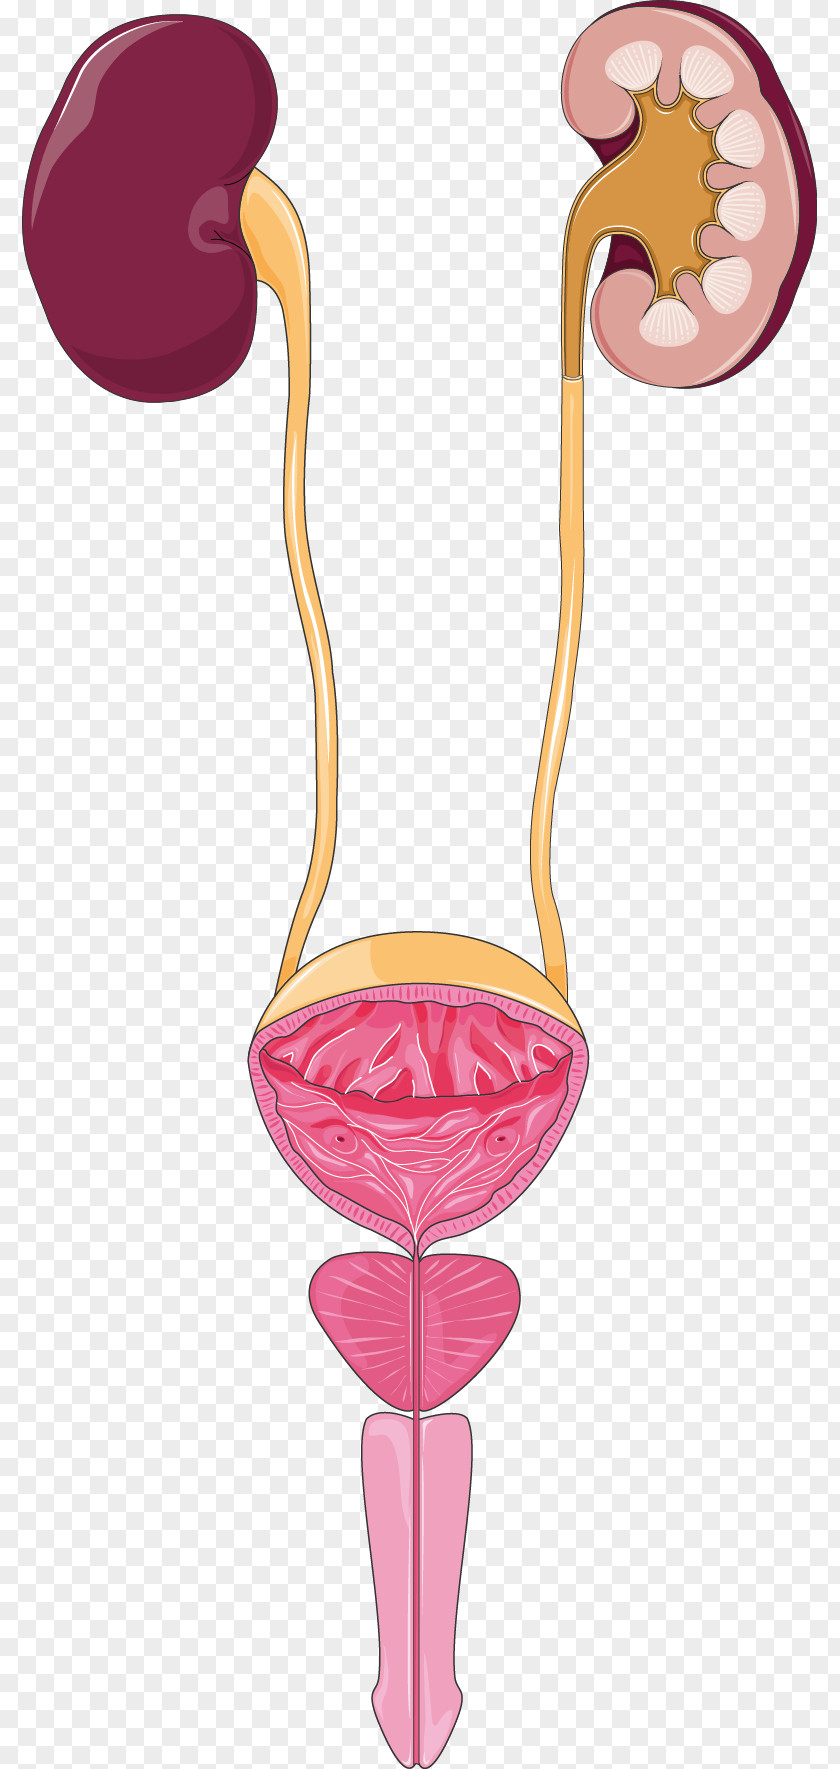 Excretory System Urine Urinary Tract Infection Kidney PNG